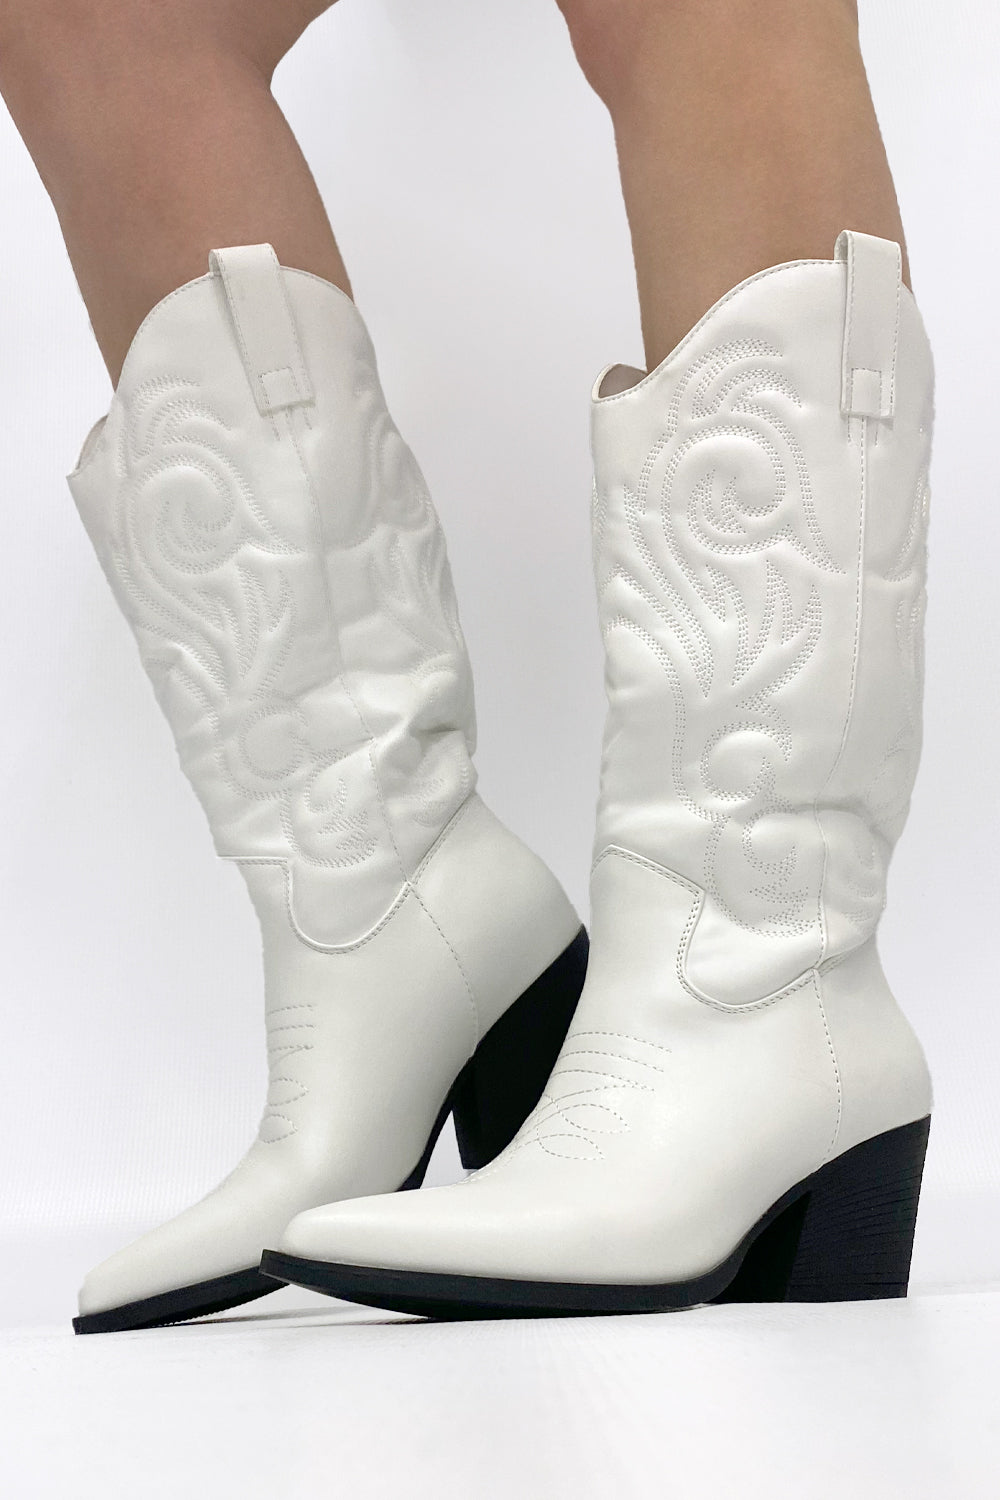 White Western Embroidered Cowboy Boots